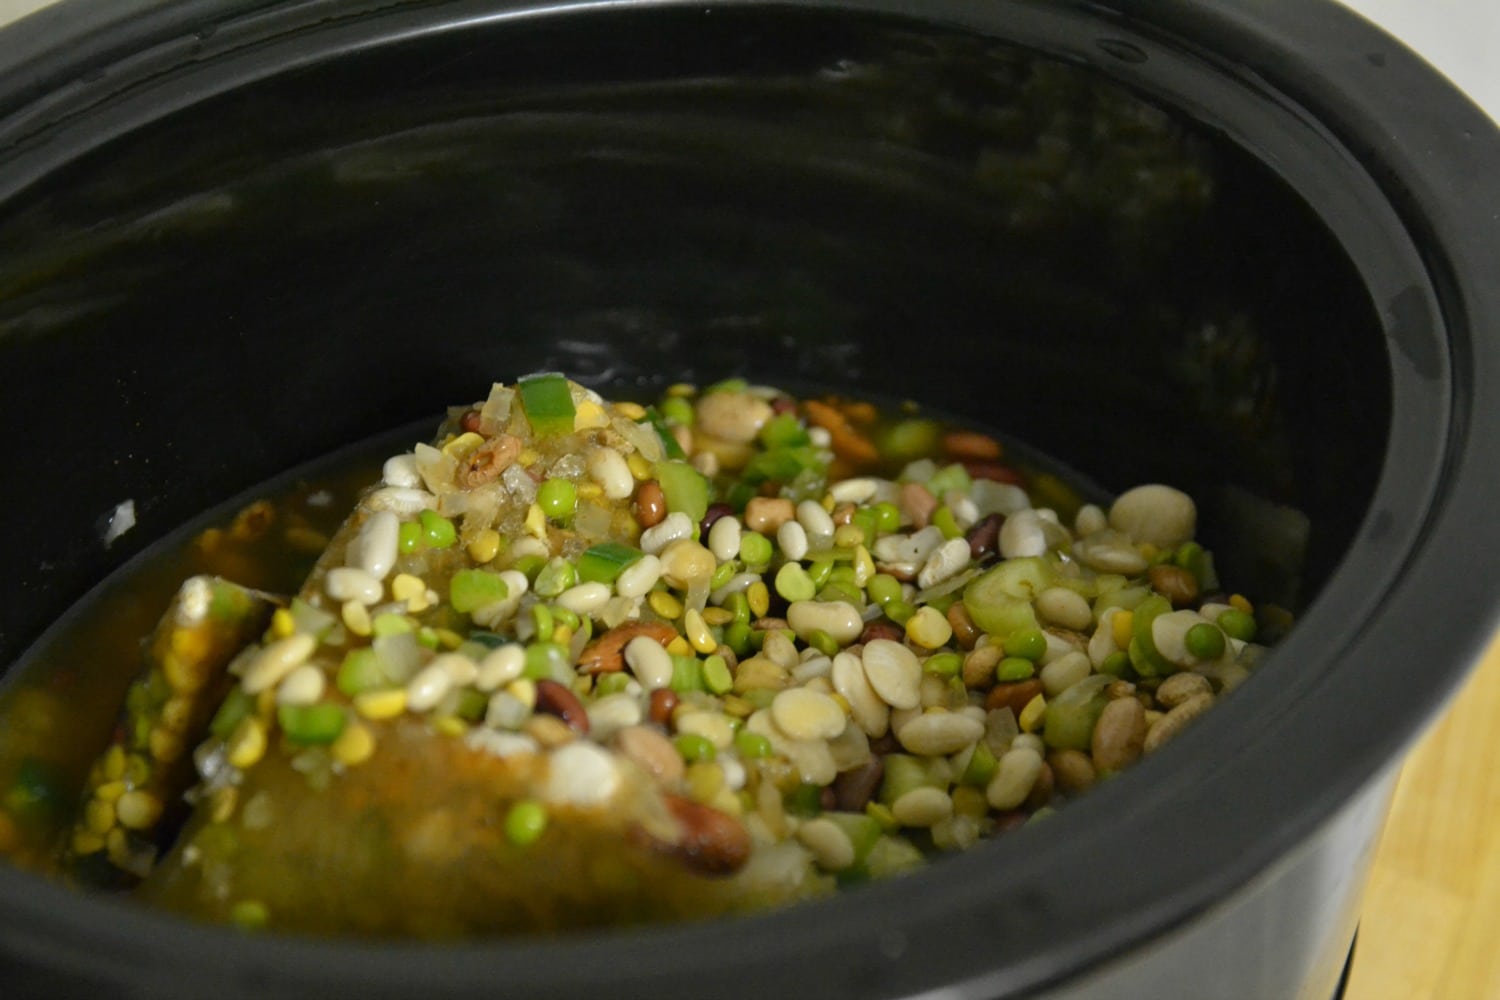 This Cajun bean soup heats up in the crock pot for a hearty, flavorful meal your kids will love!